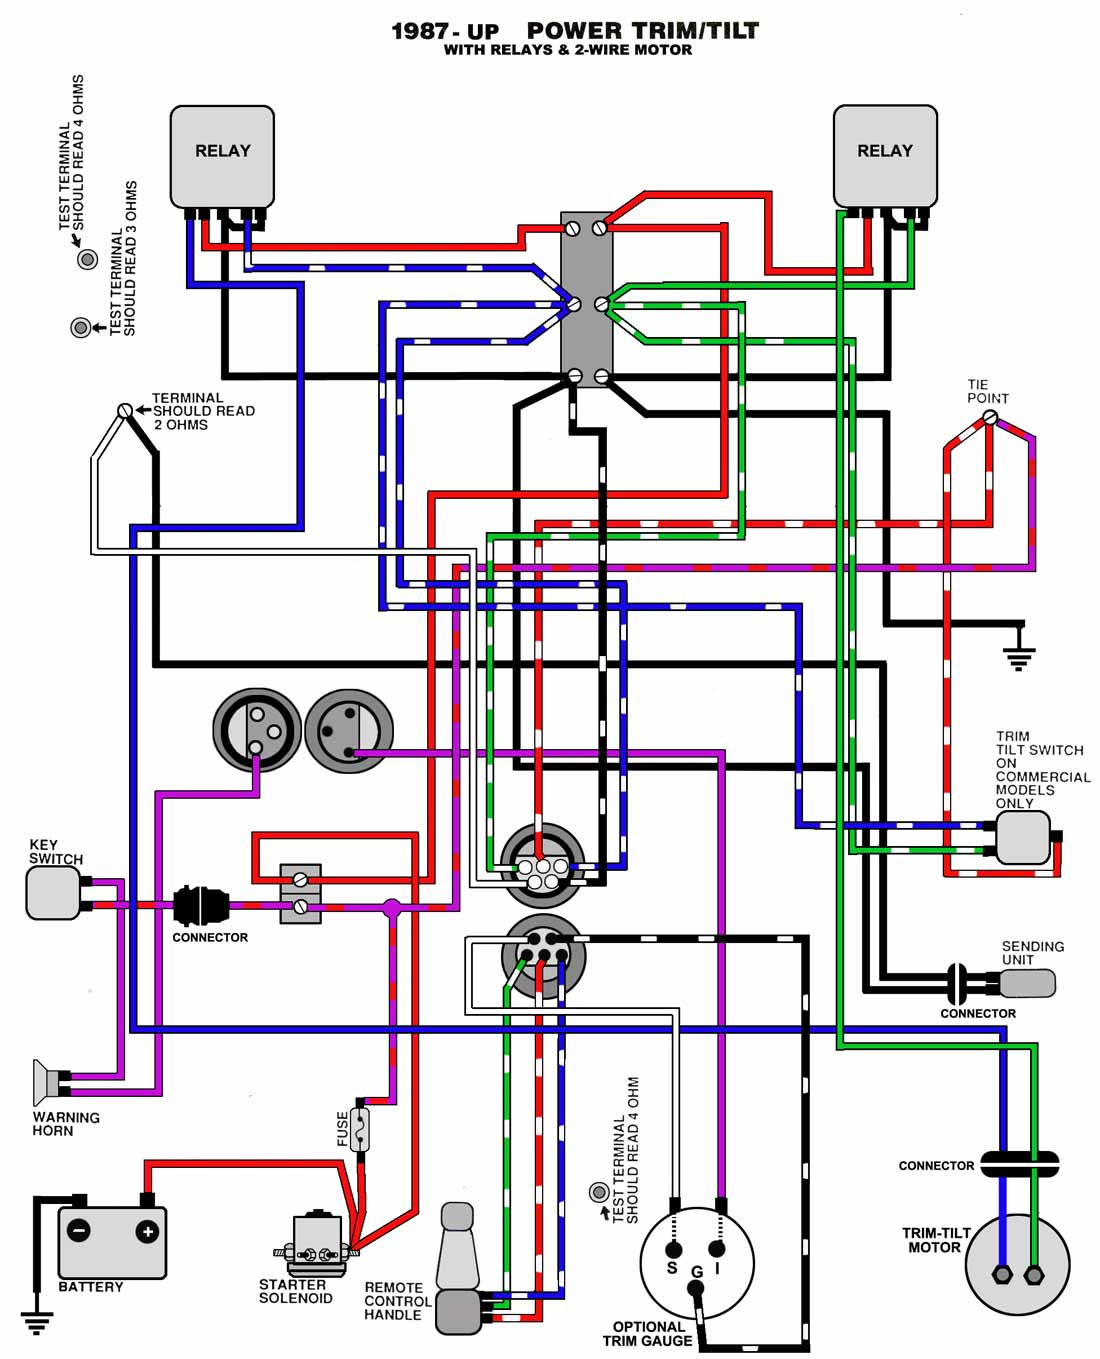 Tilt Switch Wiring Diagram | Wiring Library - Wiring Diagram For Mercury Outboard Motor